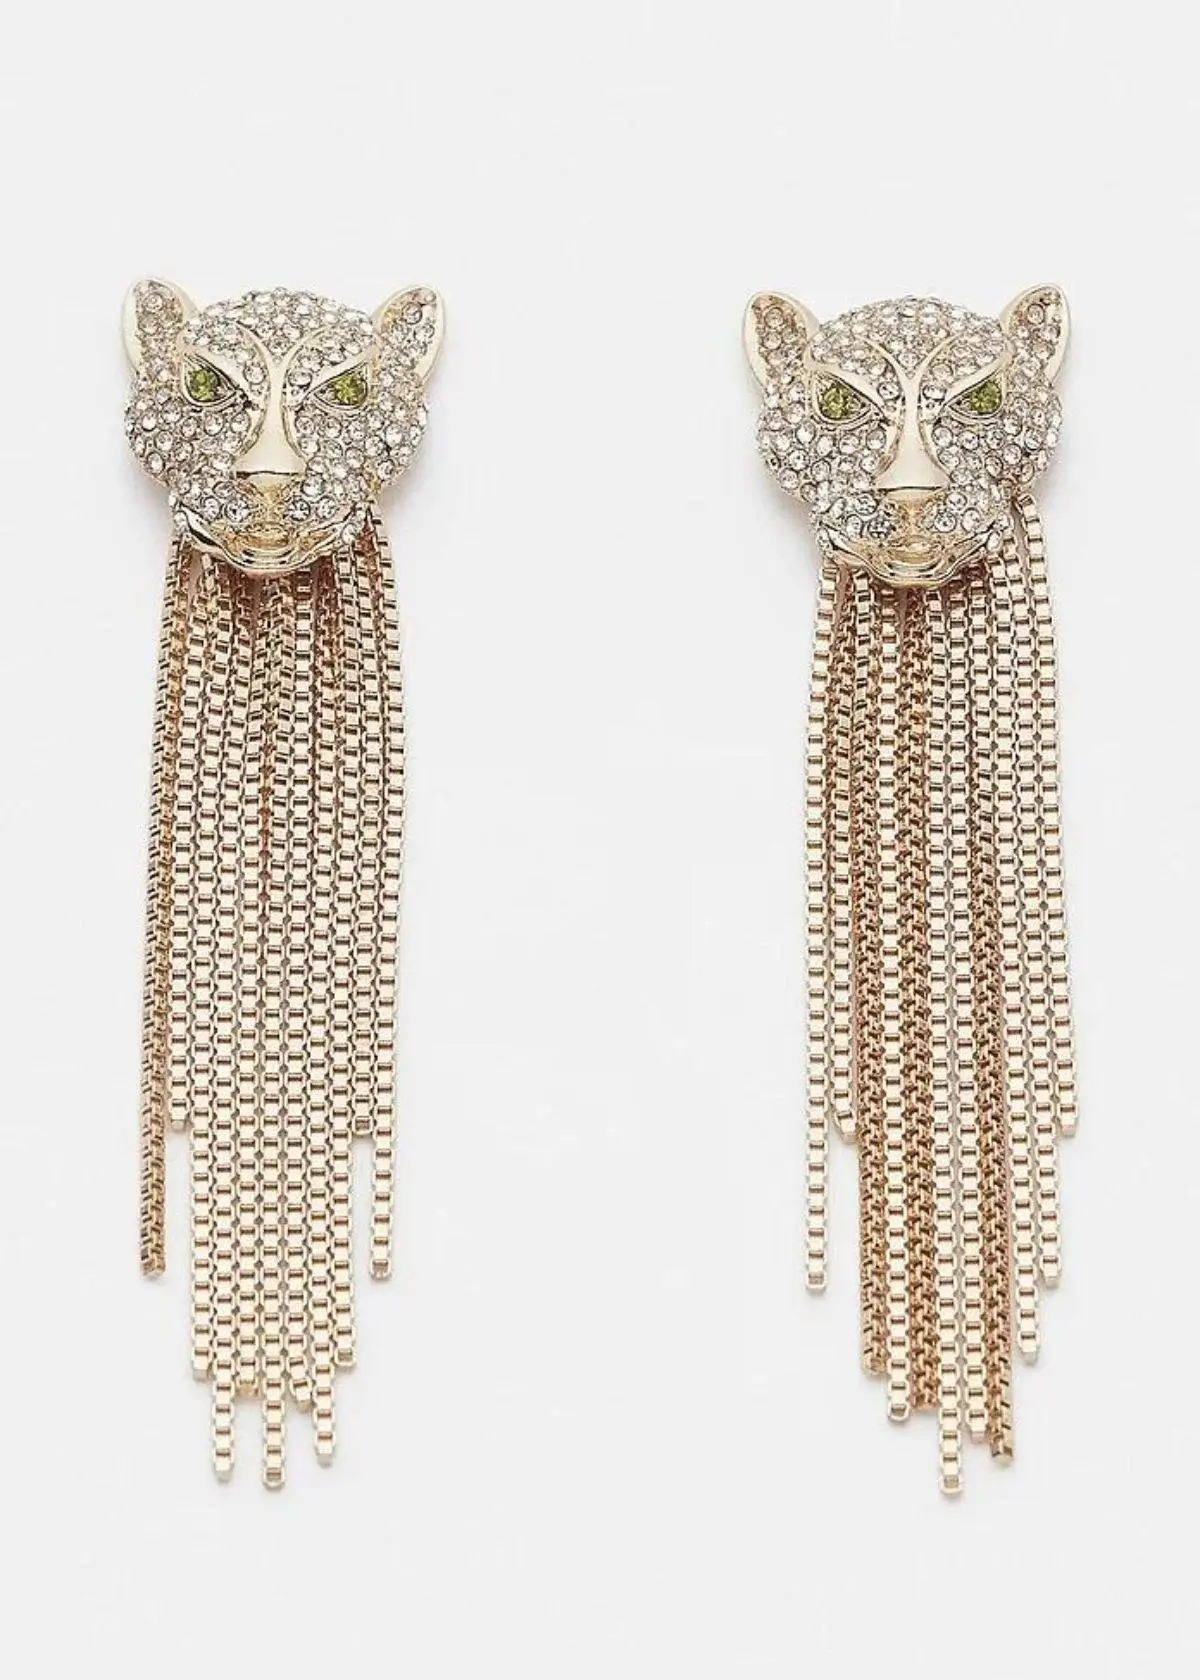 How to Choose the Right Tiger Earrings?